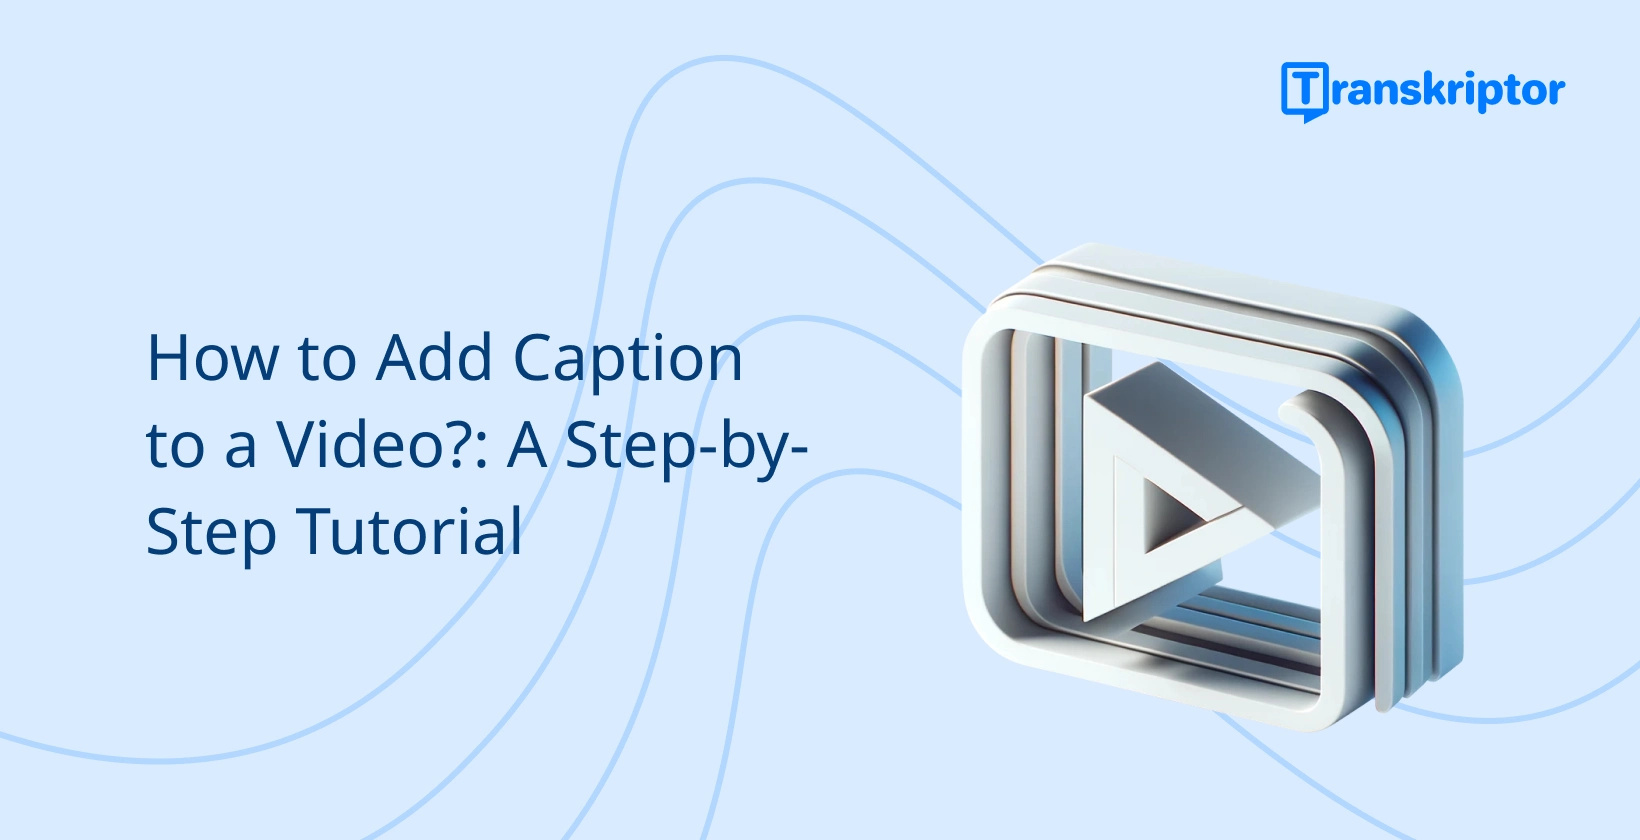 Step-by-step tutorial banner on adding captions to videos, with a play button icon symbolizing video editing.